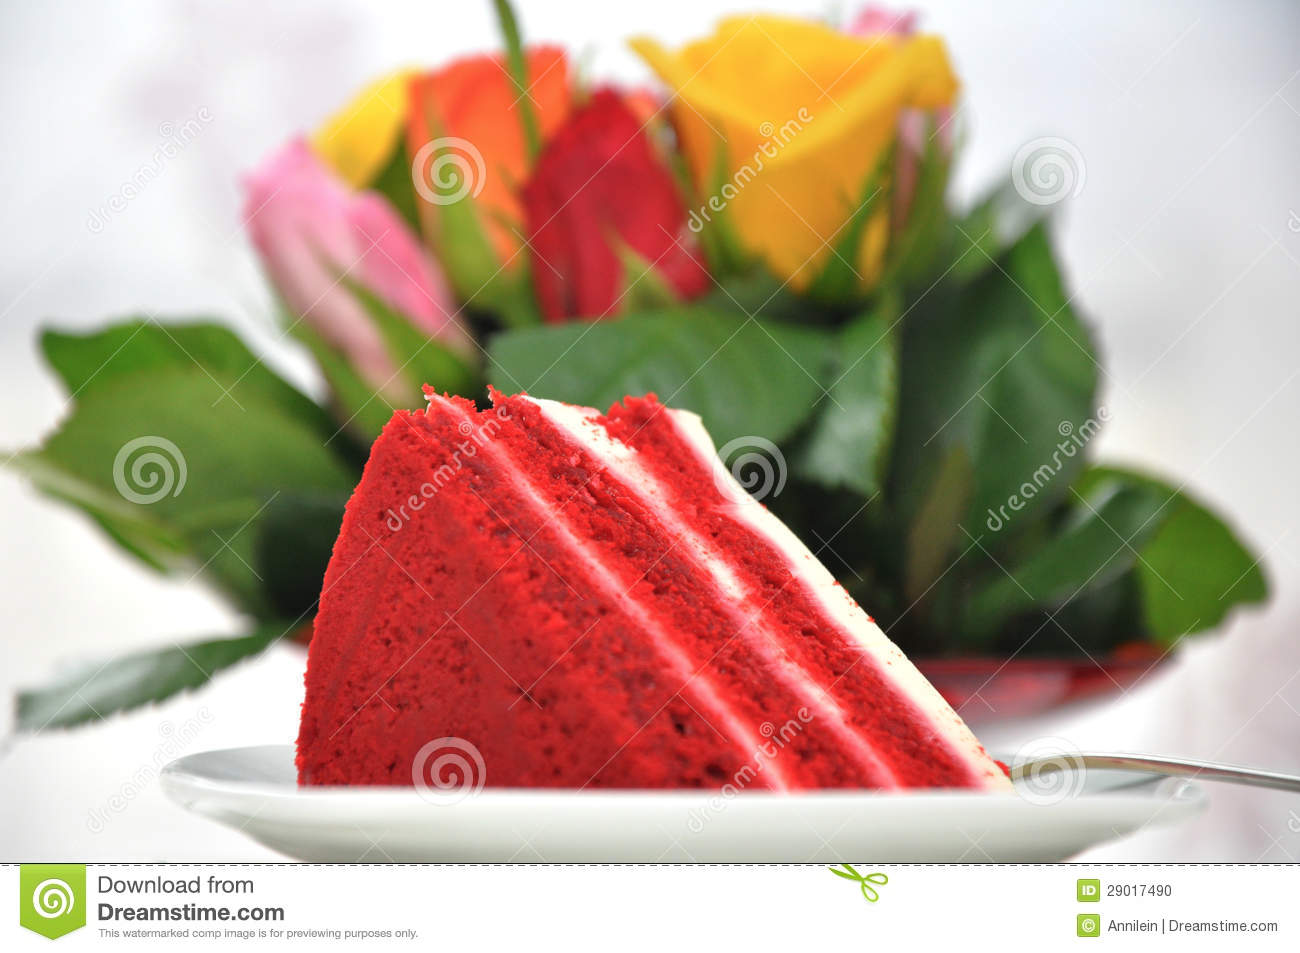 Slice Of Red Velvet Cake On Plate With Roses In The Background